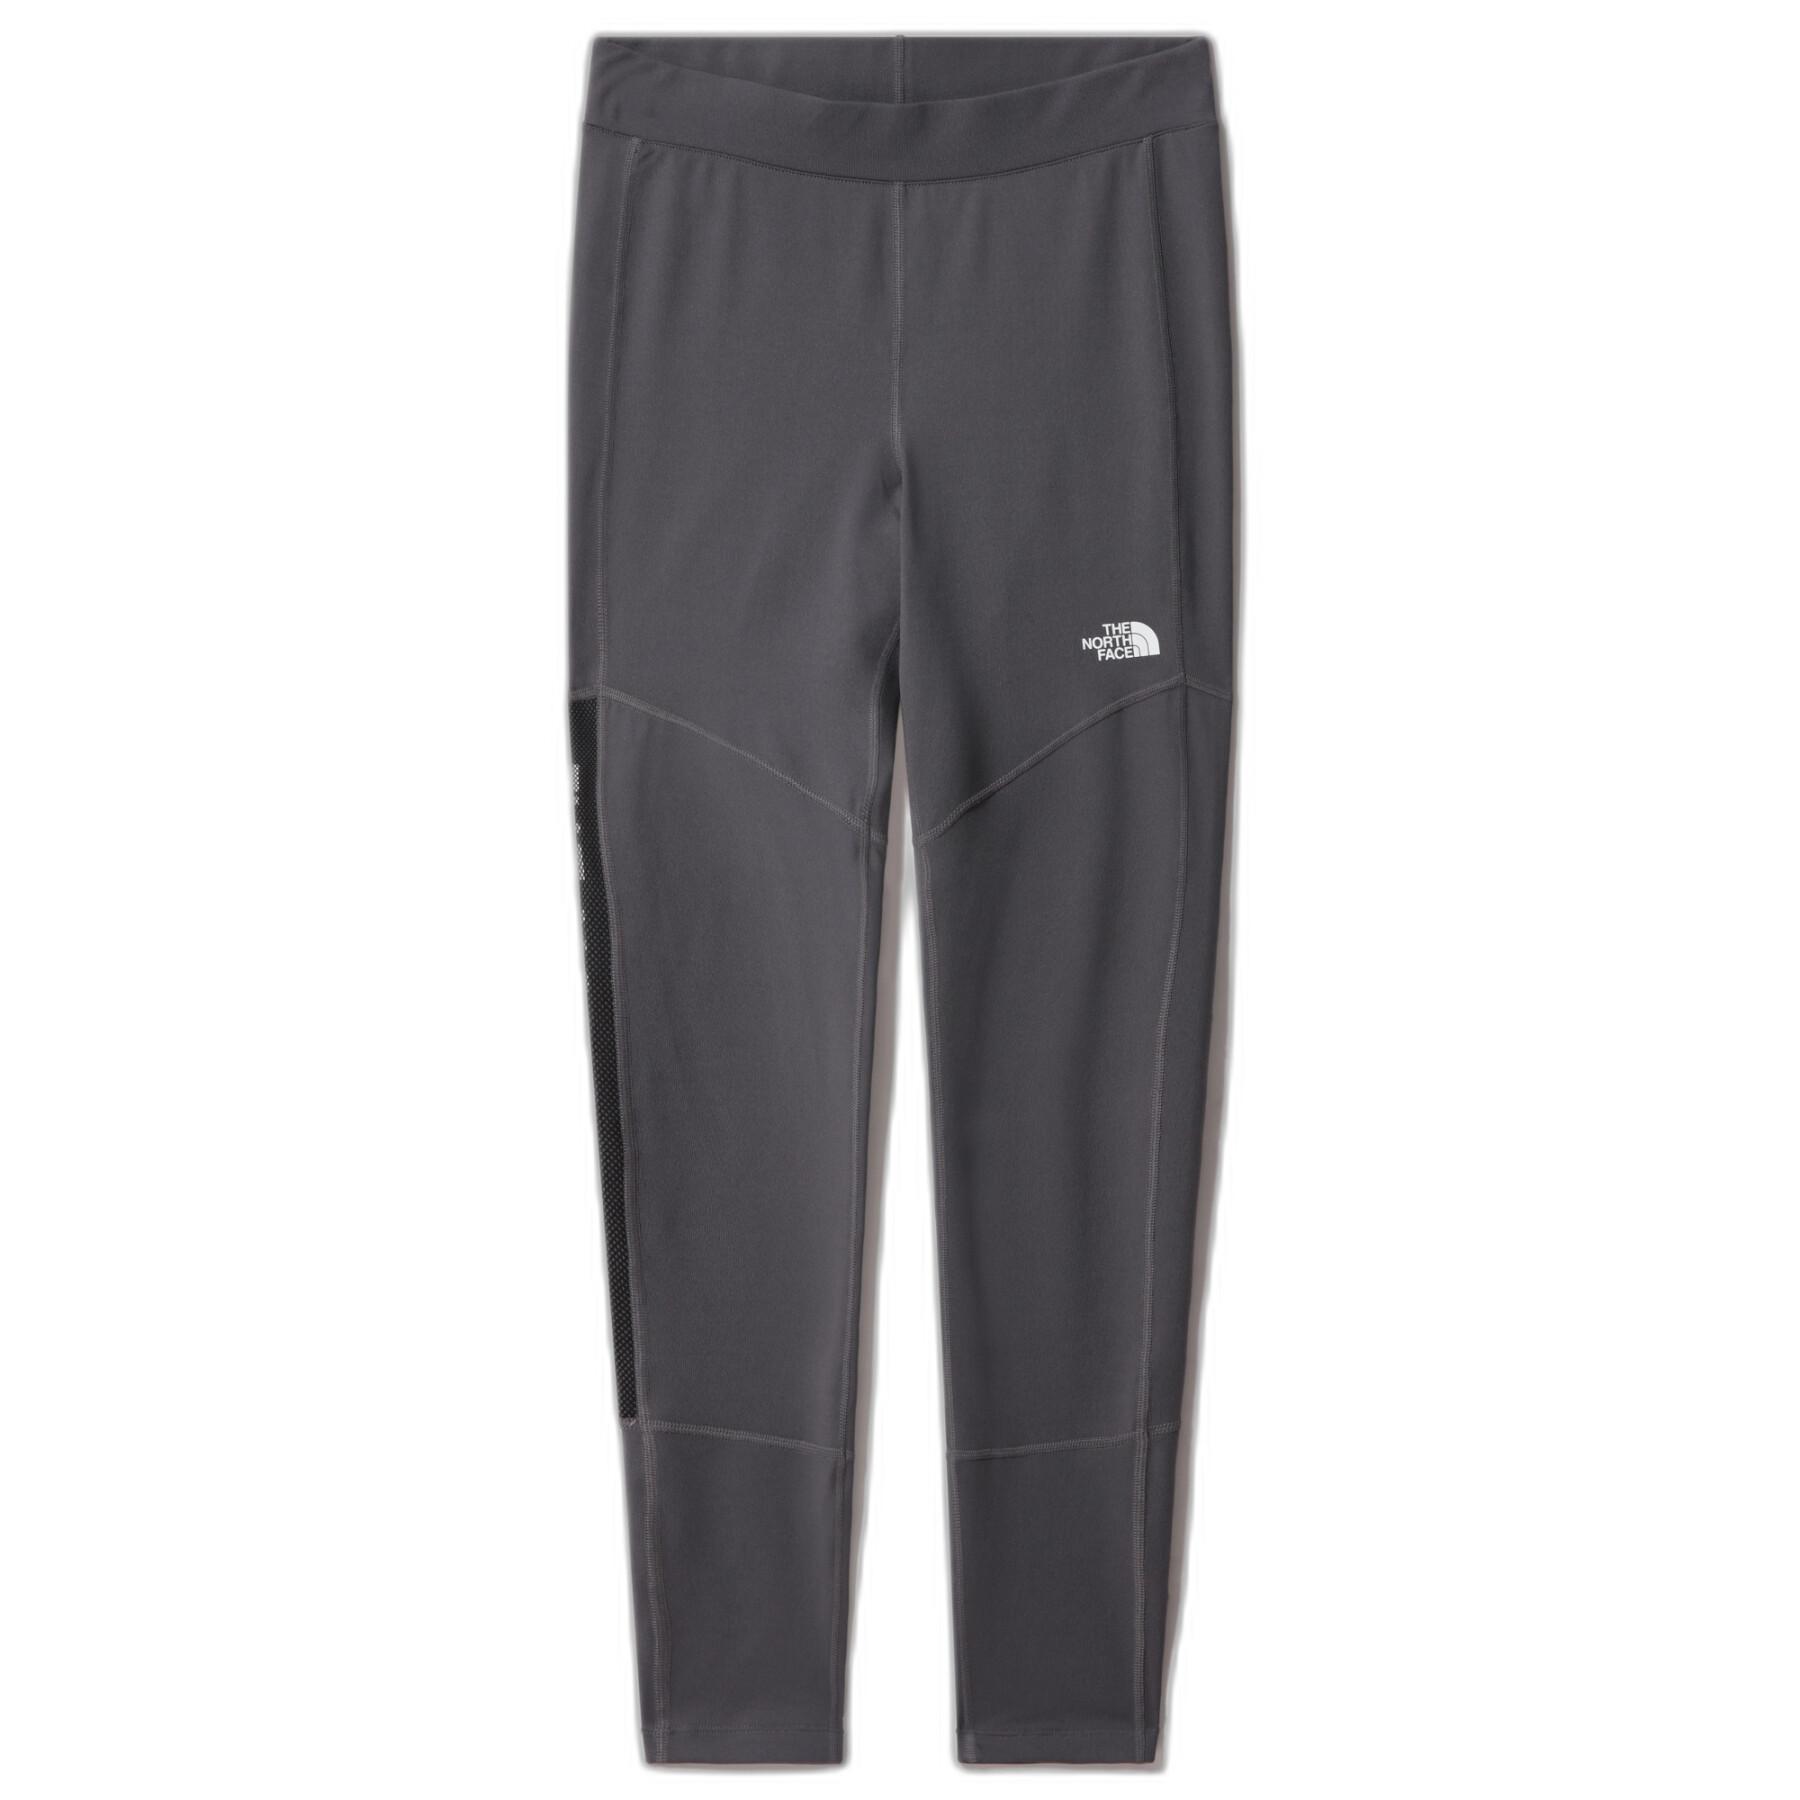 Rajstopy The North Face femme Tight